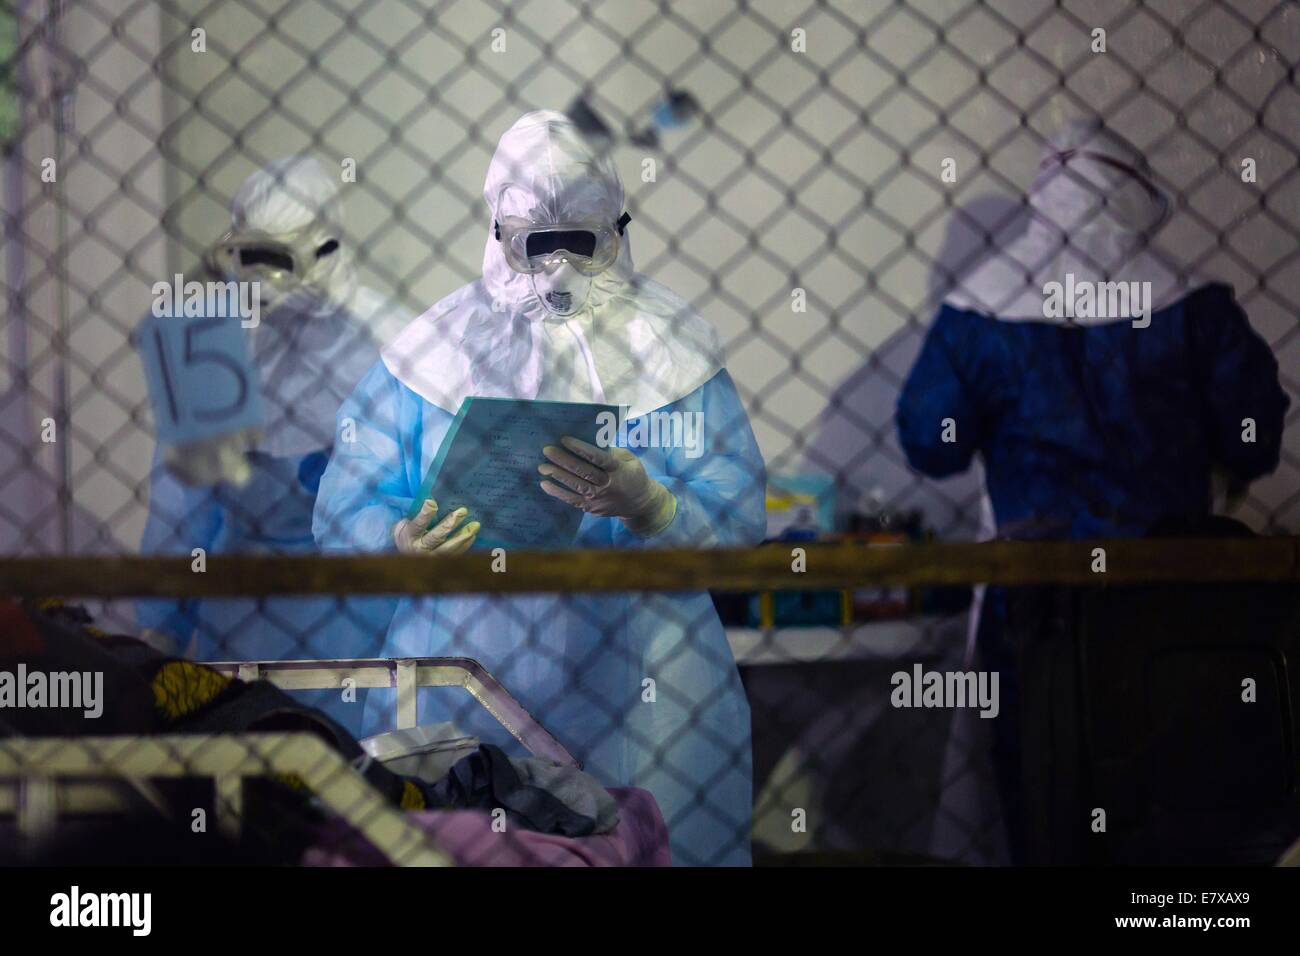 A health care worker checks on patients admitted to the Ebola Treatment Unit at the newly opened Island Clinic September 22, 2014 in Monrovia, Liberia. The facility opened by the WHO and the Ministry of Health in response to the surge of patients needing an Ebola Treatment. Stock Photo